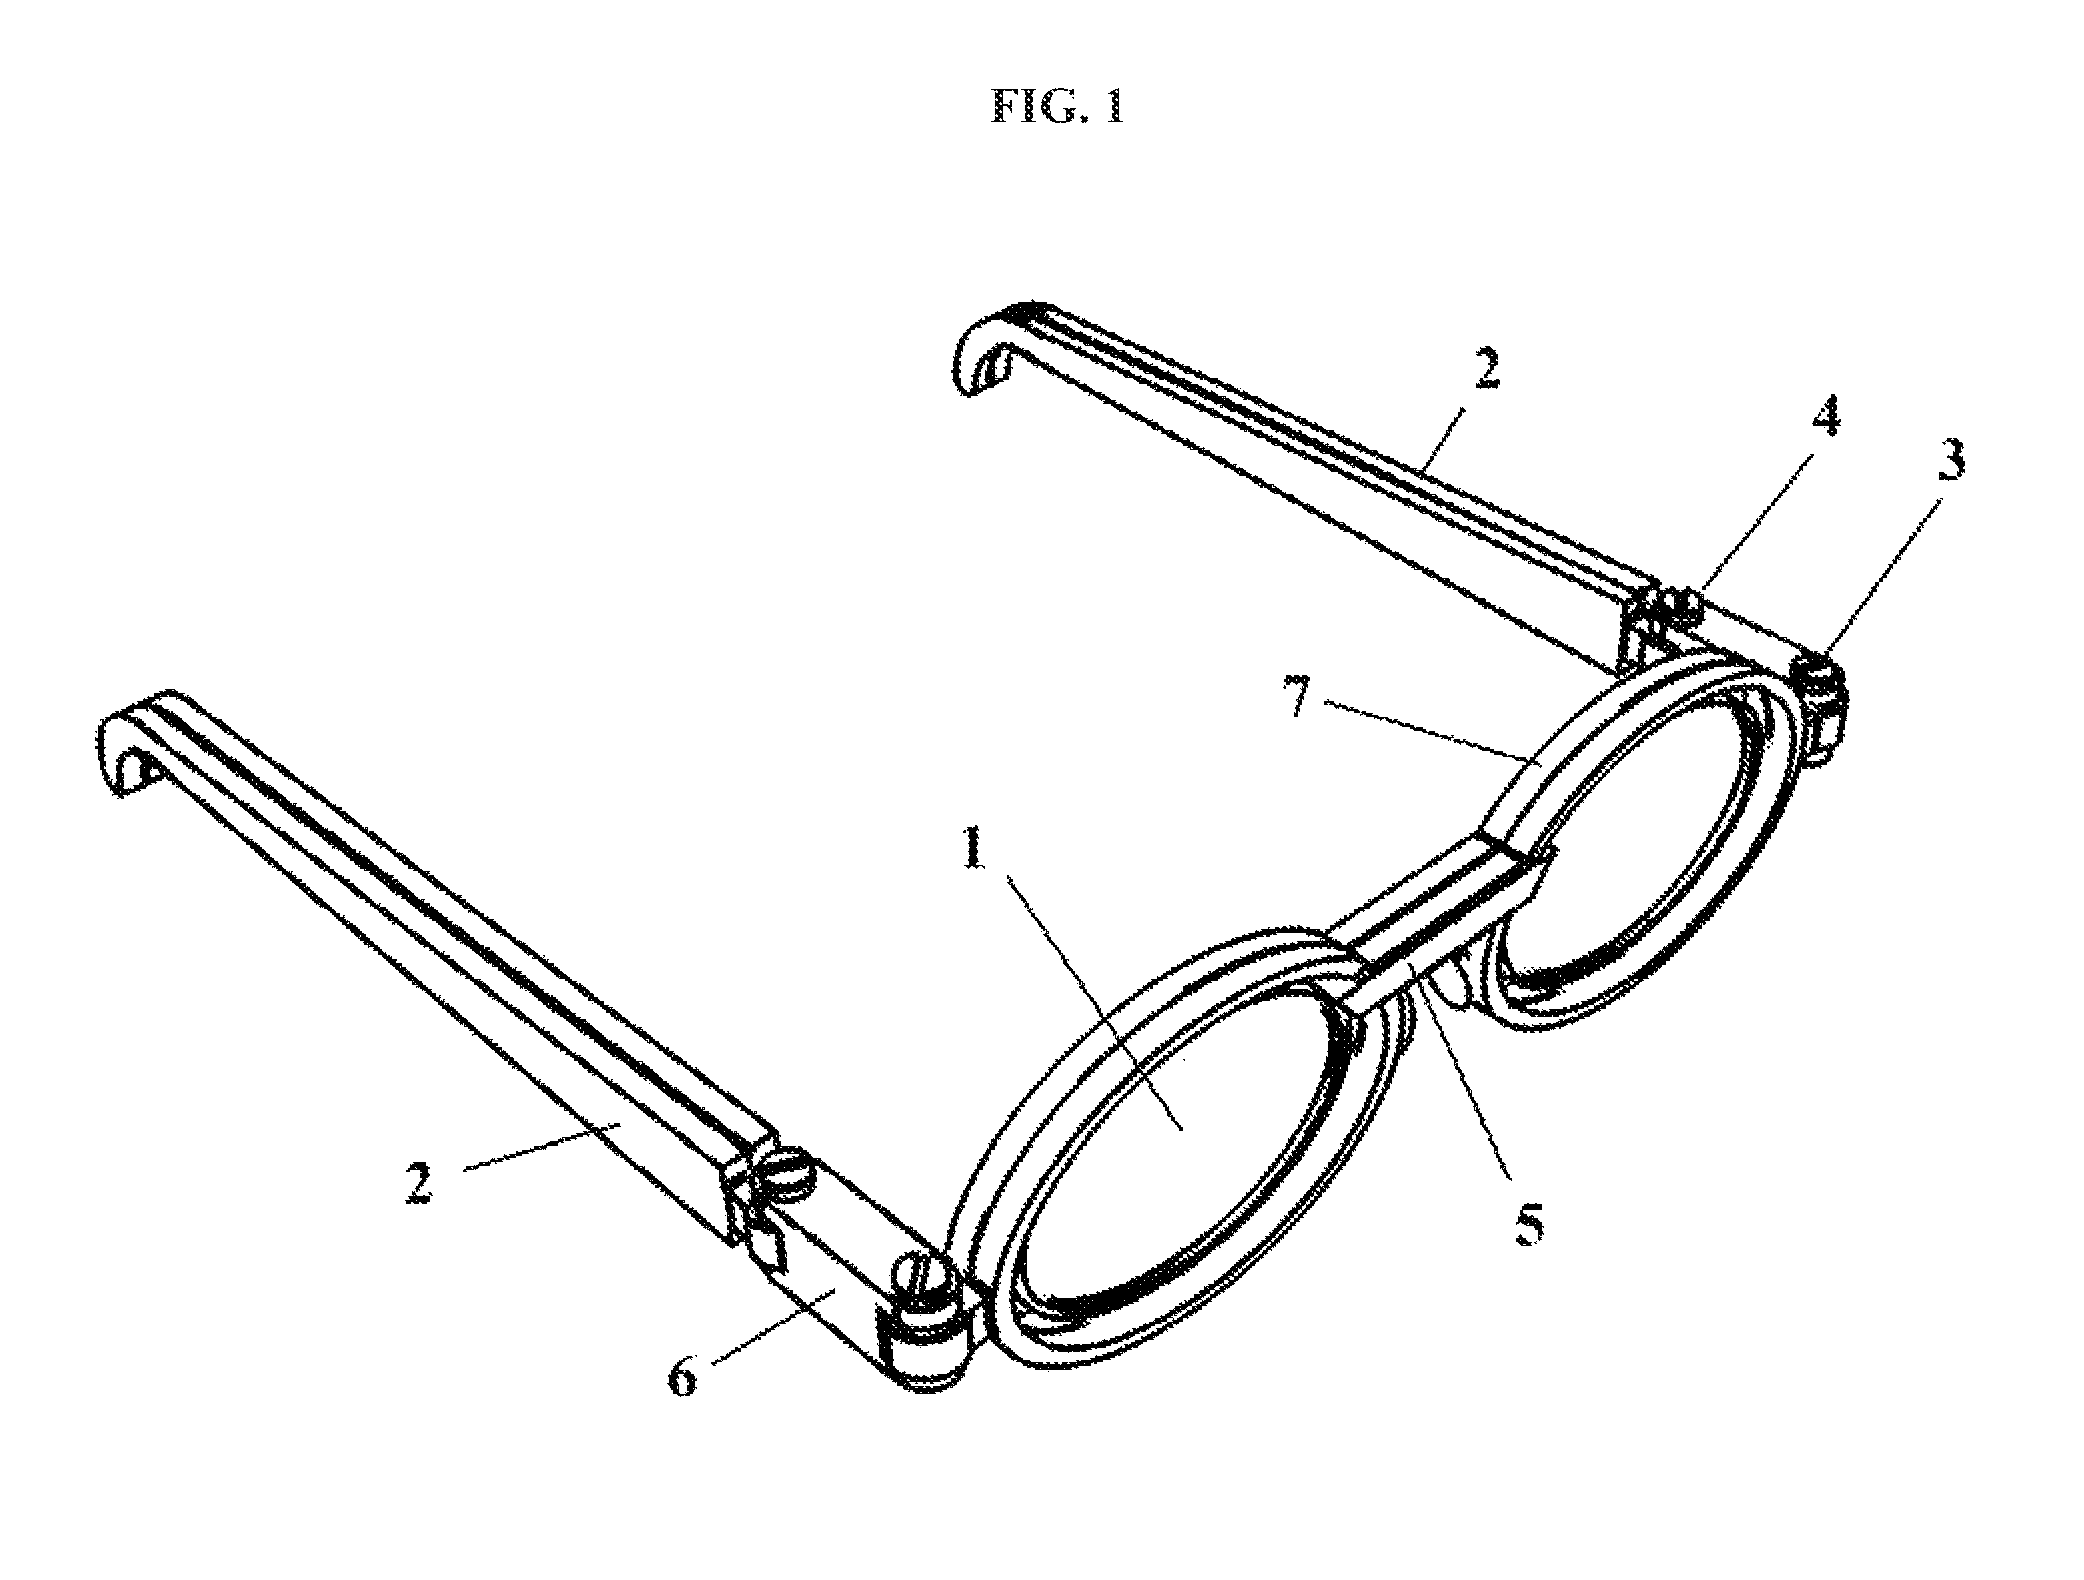 Reversable adjustable eyeglasses with polarized and/or prescription lenses